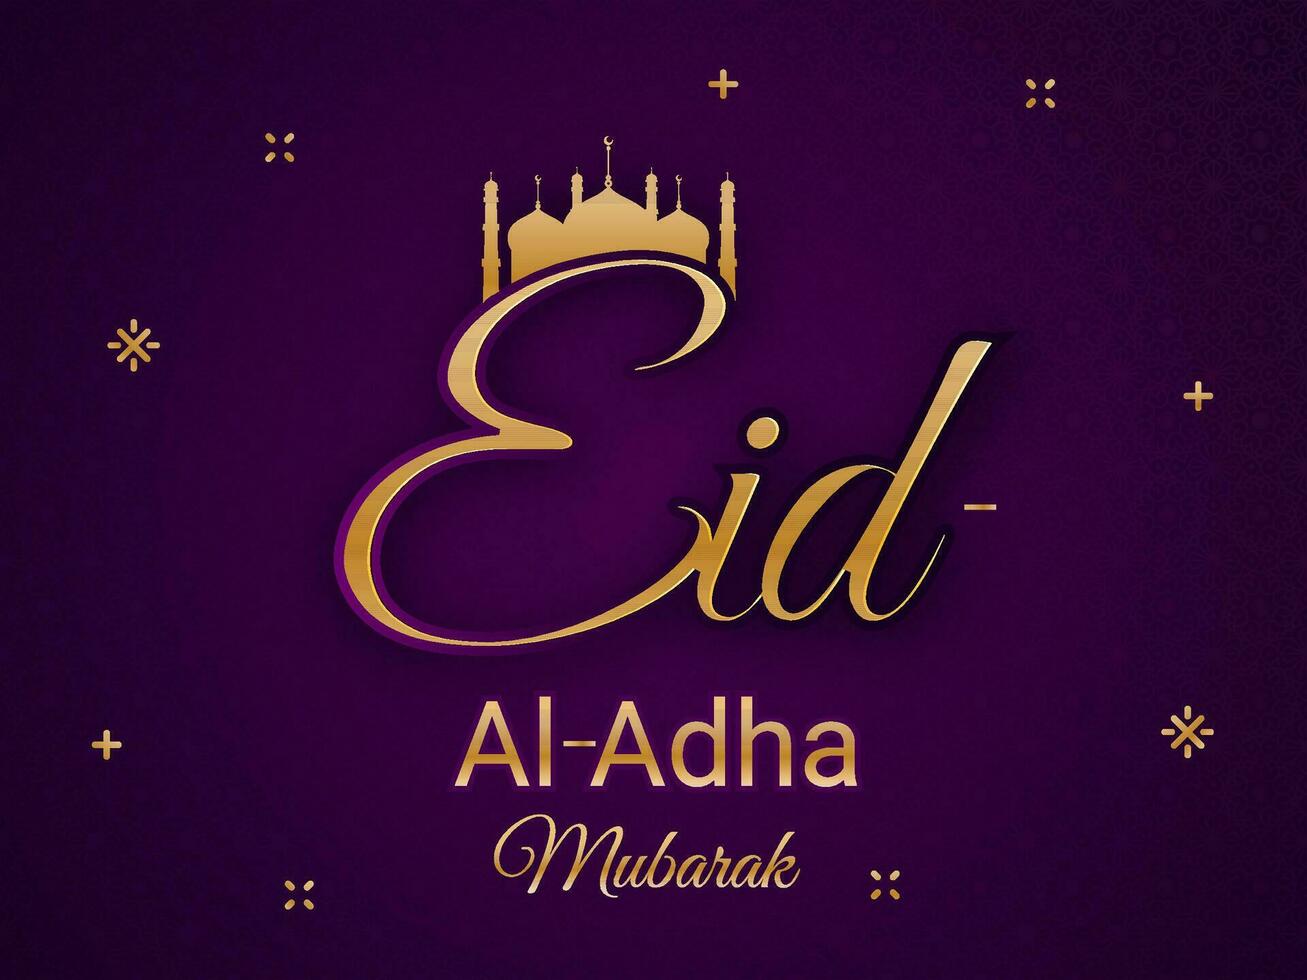 Golden Eid-Al-Adha Mubarak Font with Silhouette Mosque on Purple Background for Islamic Festival of Sacrifice Concept. vector